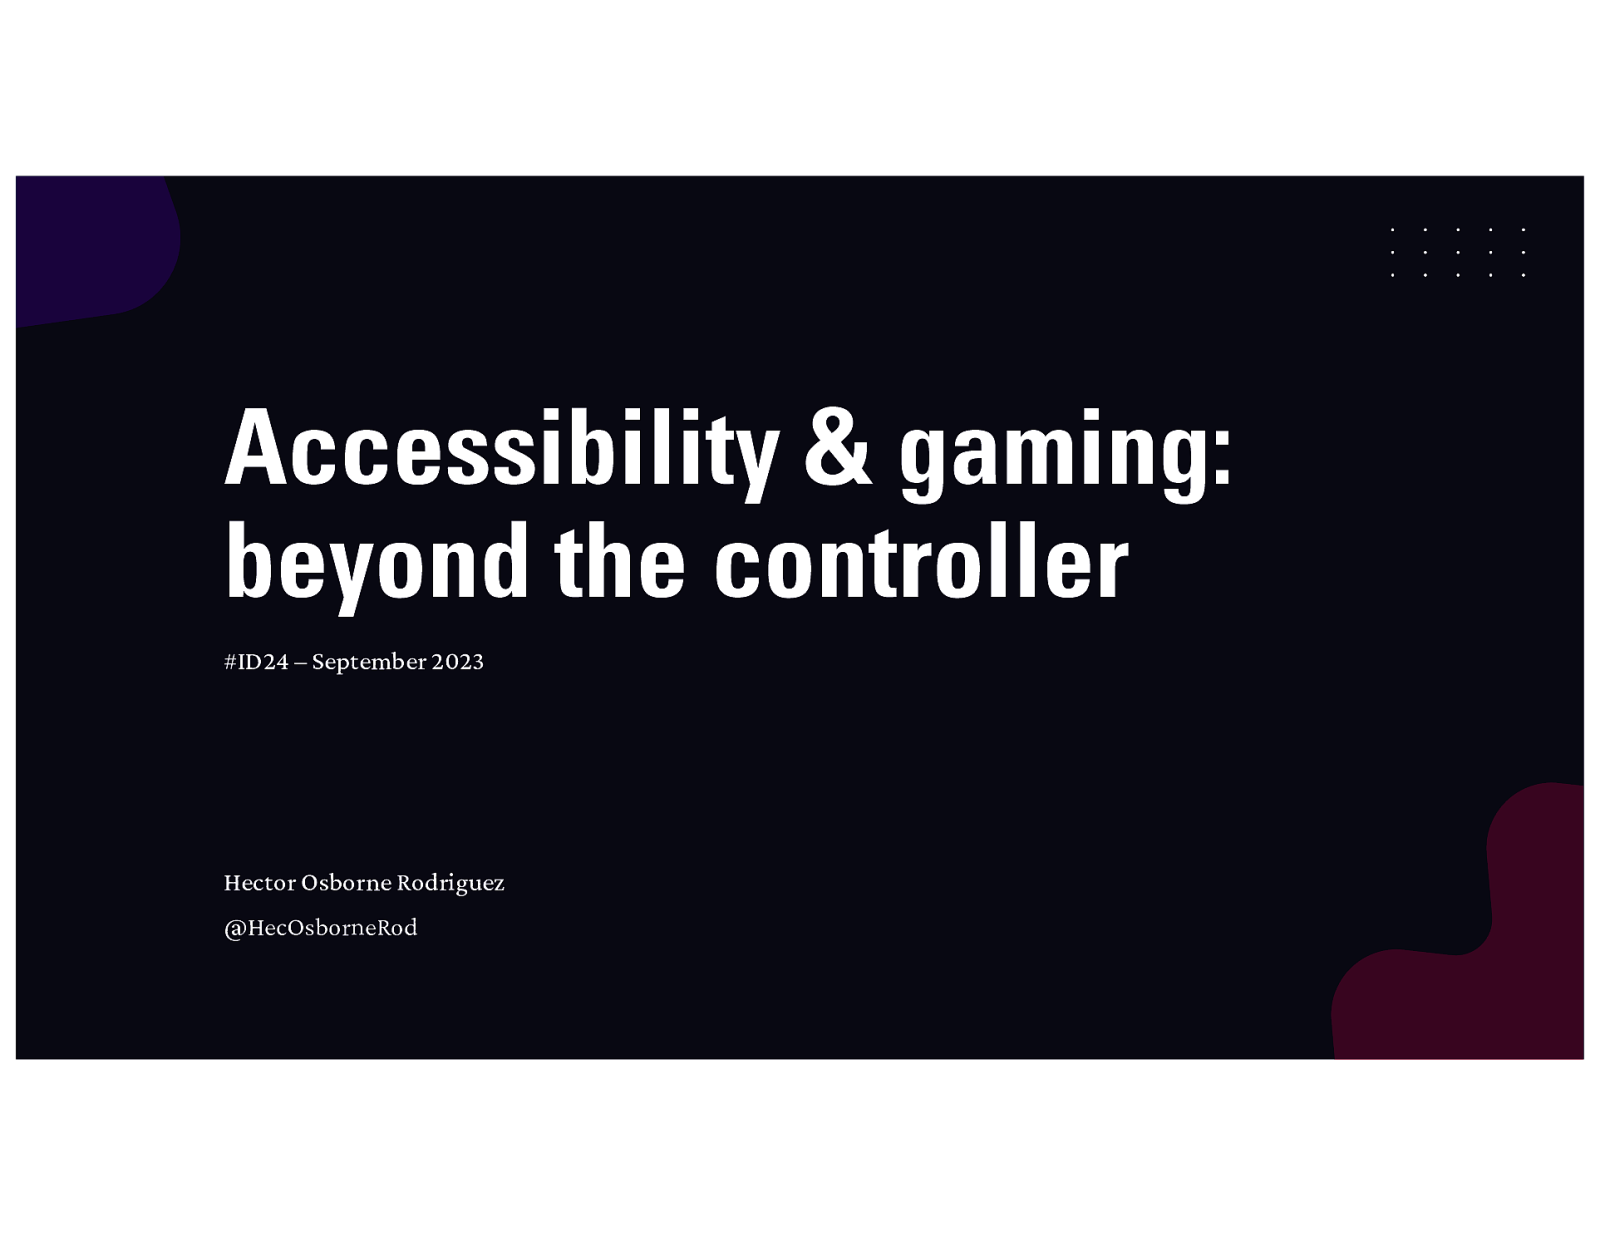 Accessibility & Gaming: beyond the controller